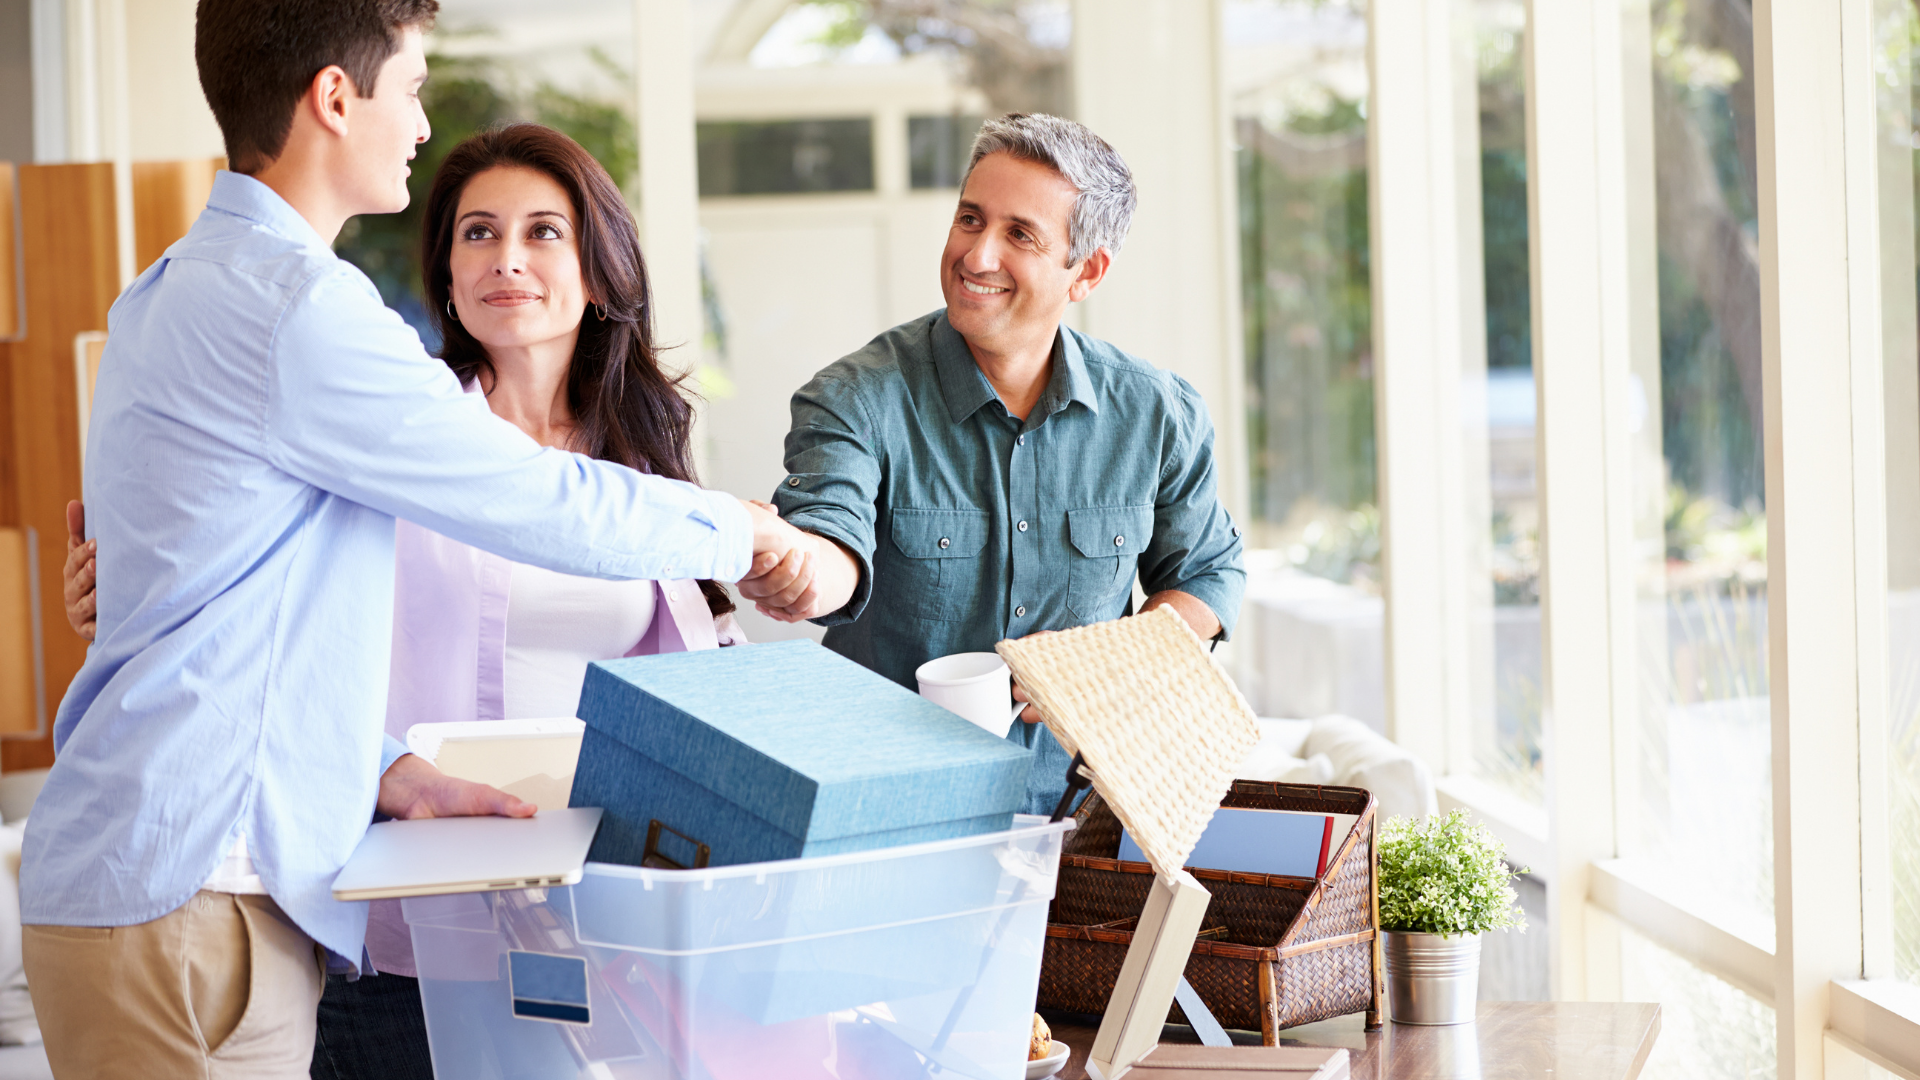 How to Quickly Sell Your Home When Downsizing